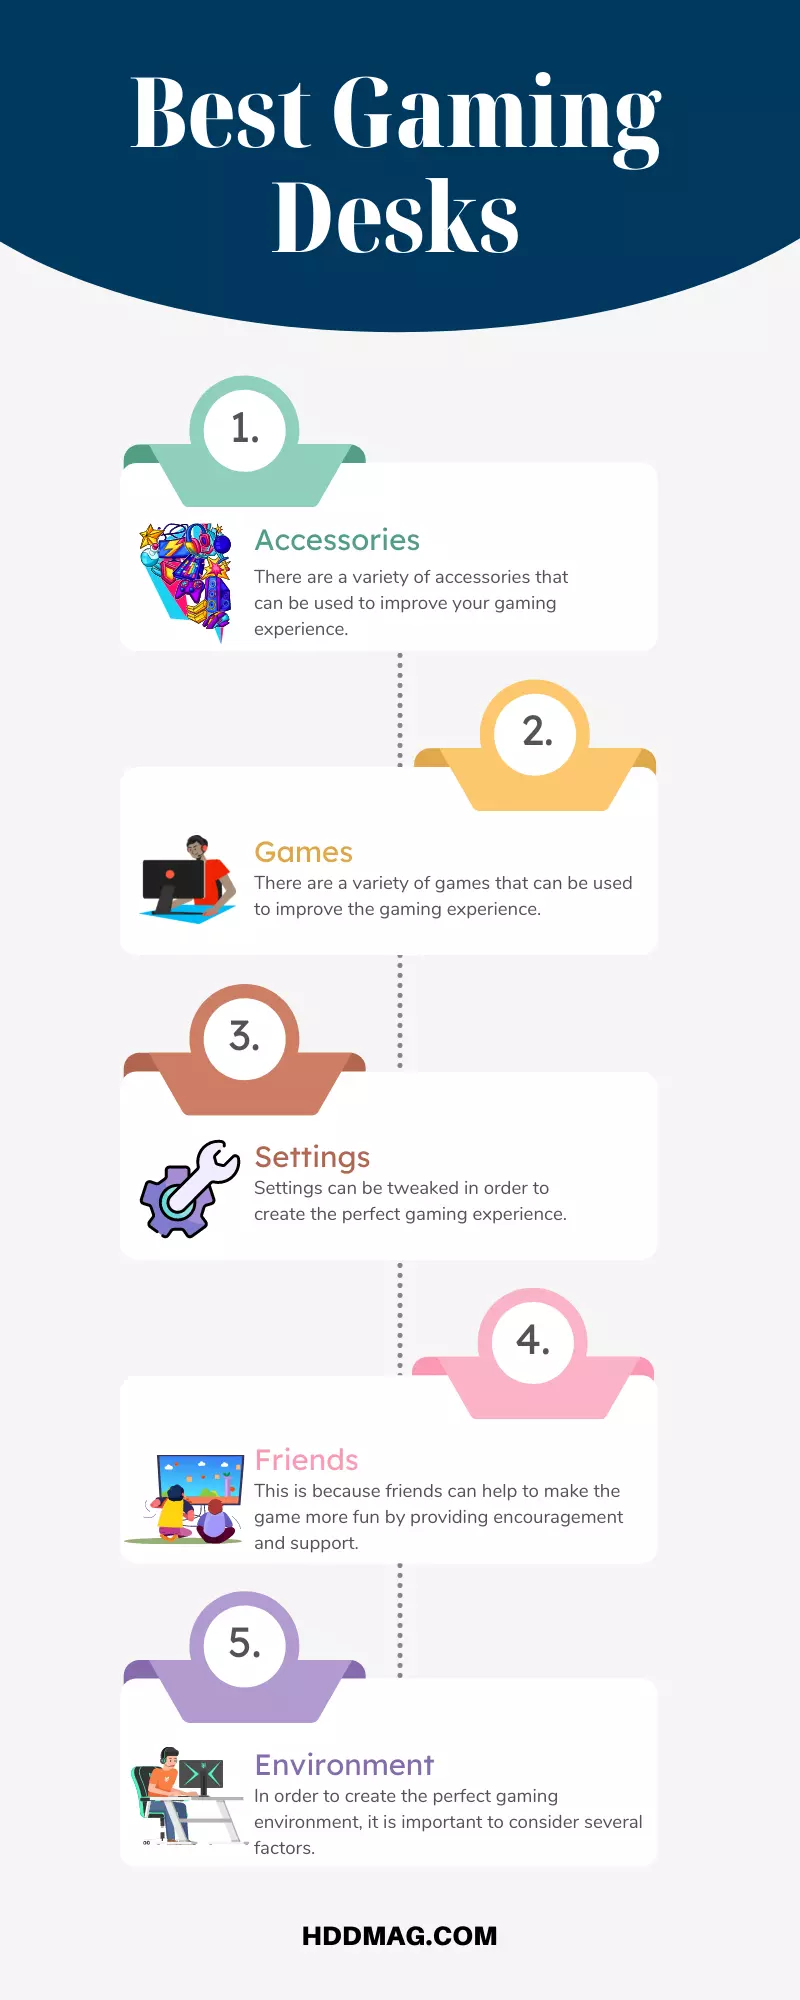 What Do You Need to Make Your Gaming Experience Better?